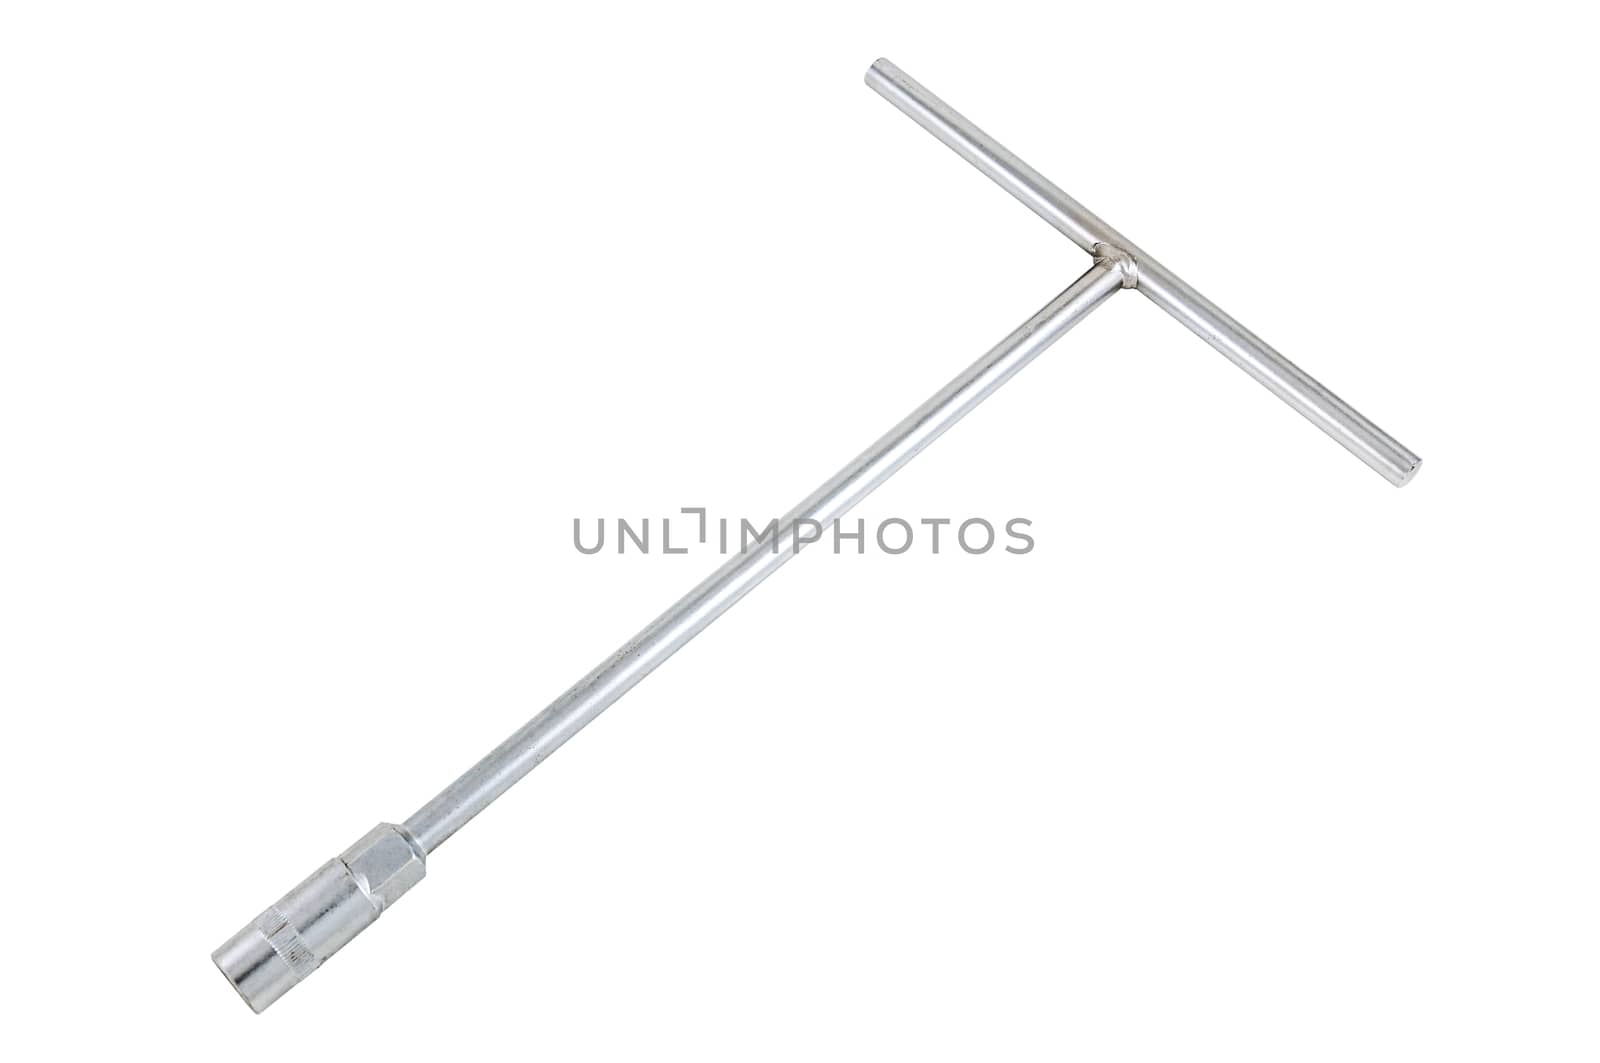 T wrench isolated on white background with clipping path